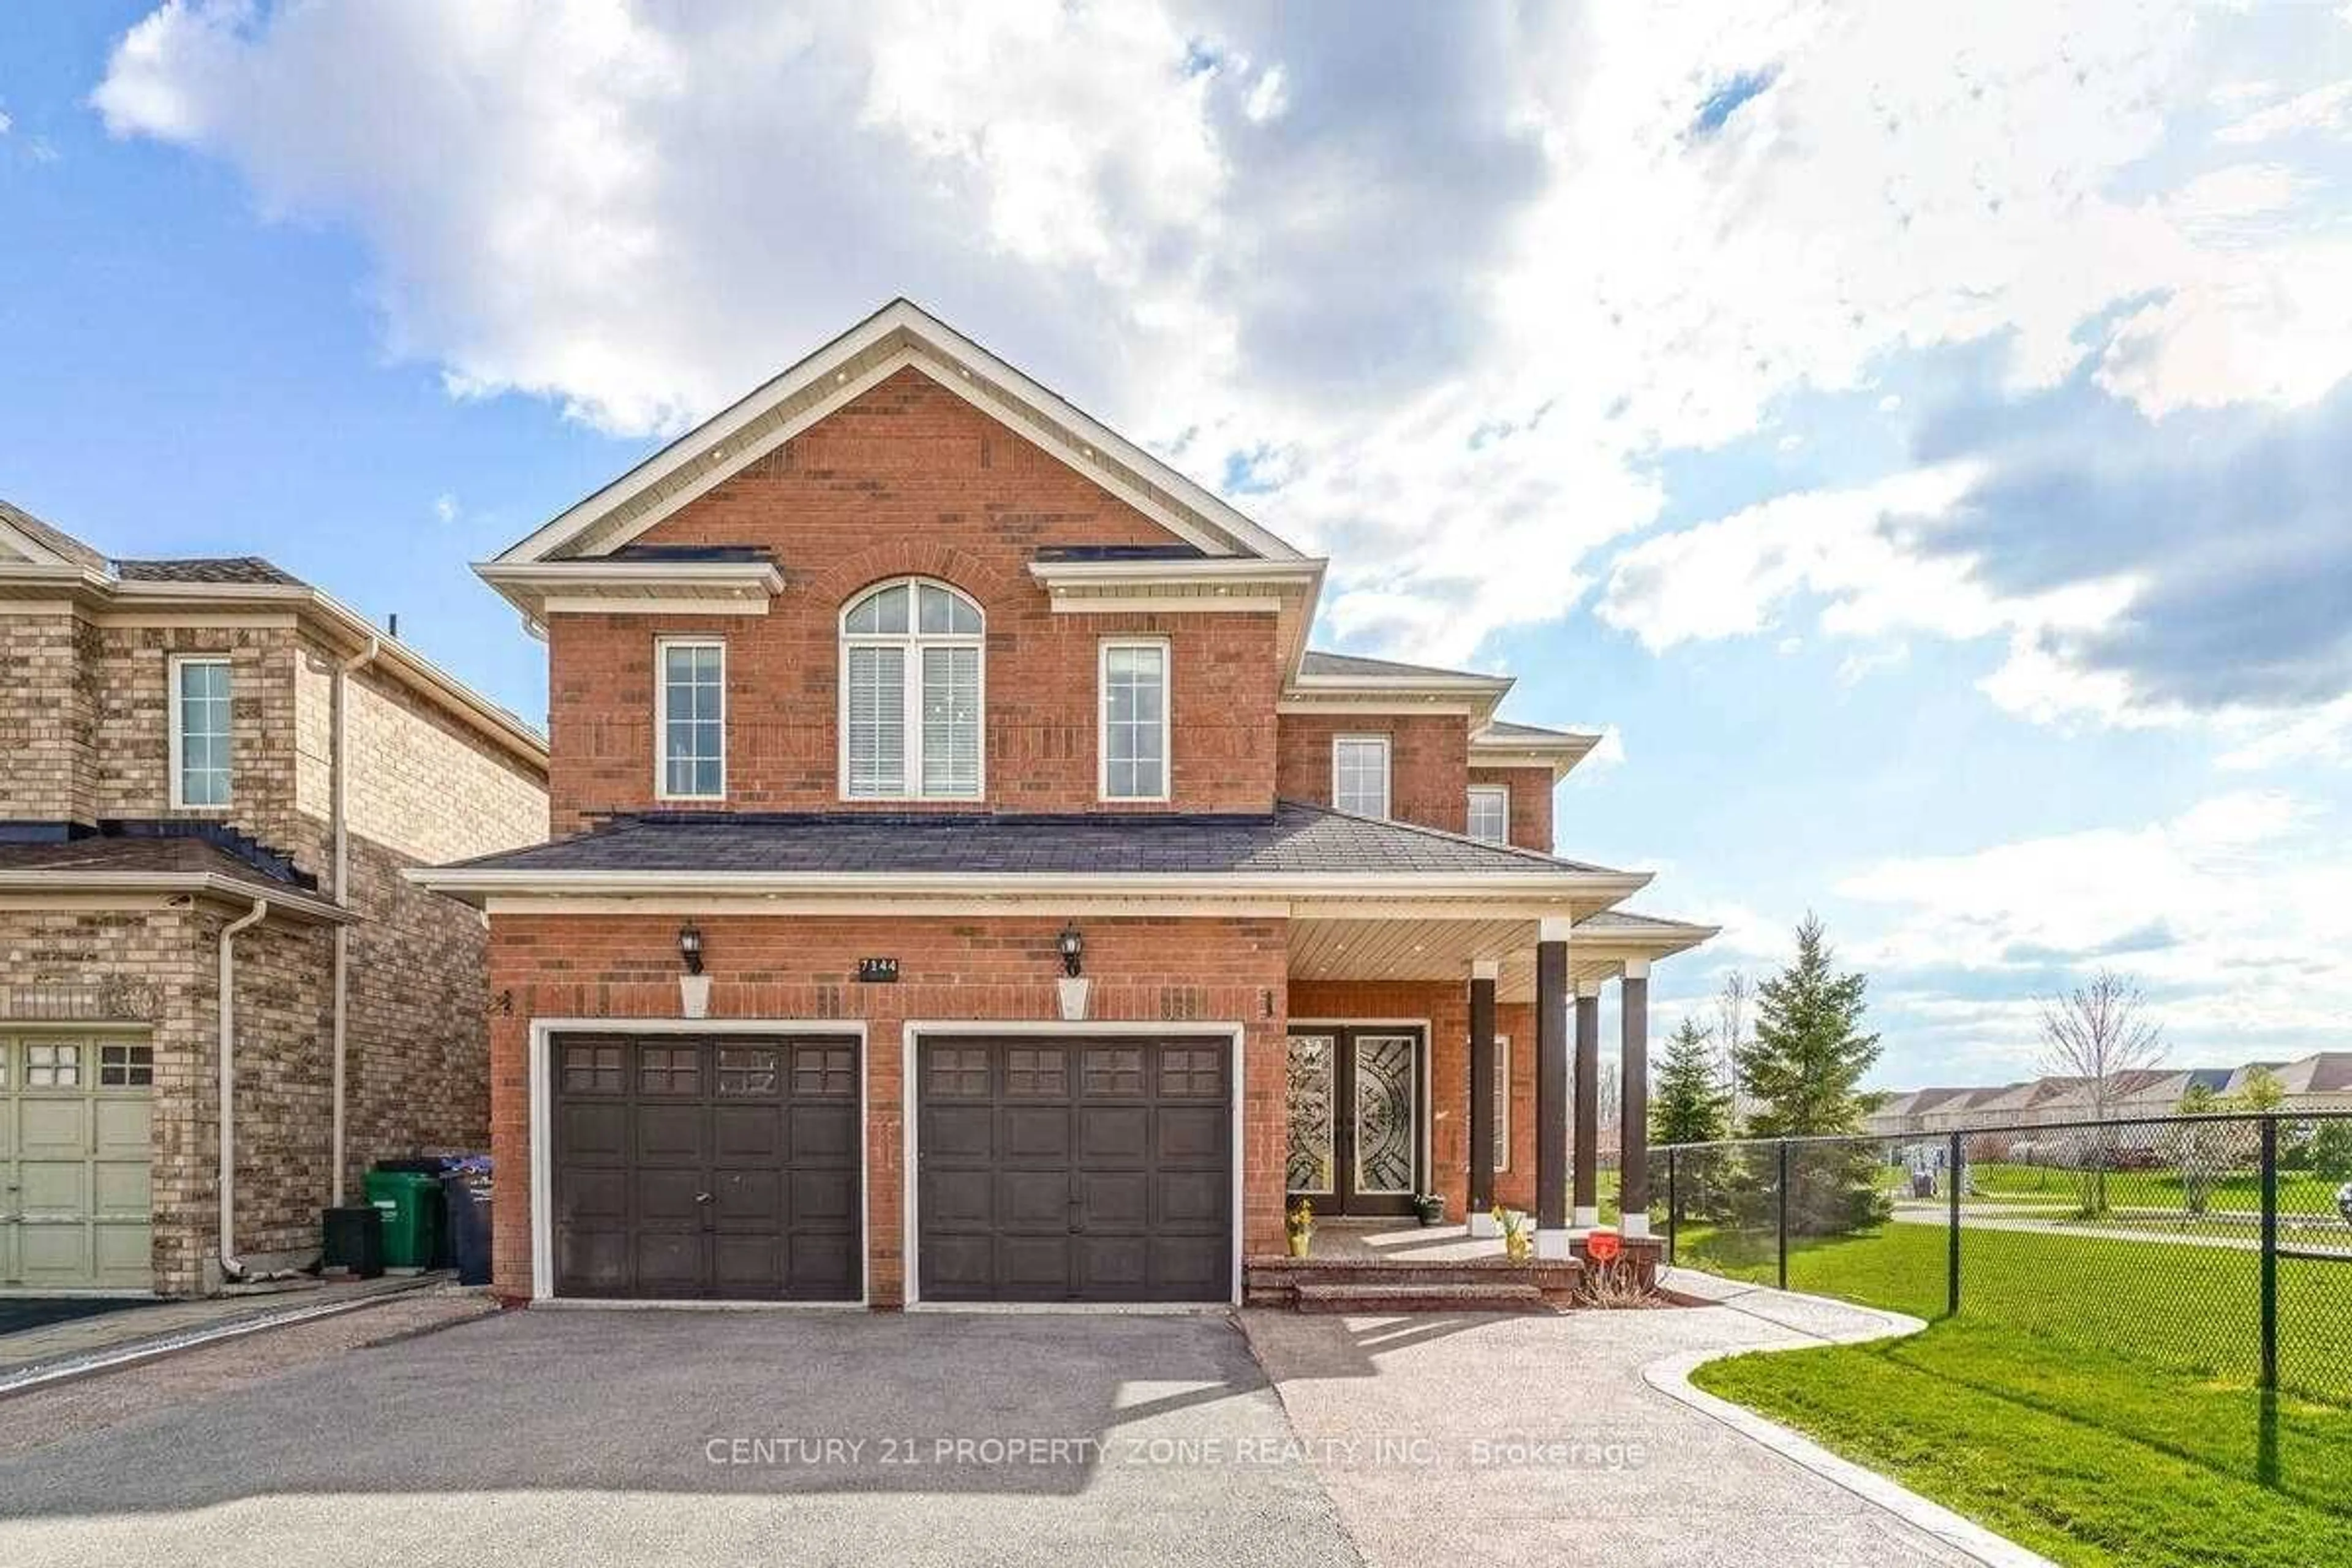 Home with brick exterior material for 7144 Saint Barbara Blvd, Mississauga Ontario L5W 0C9